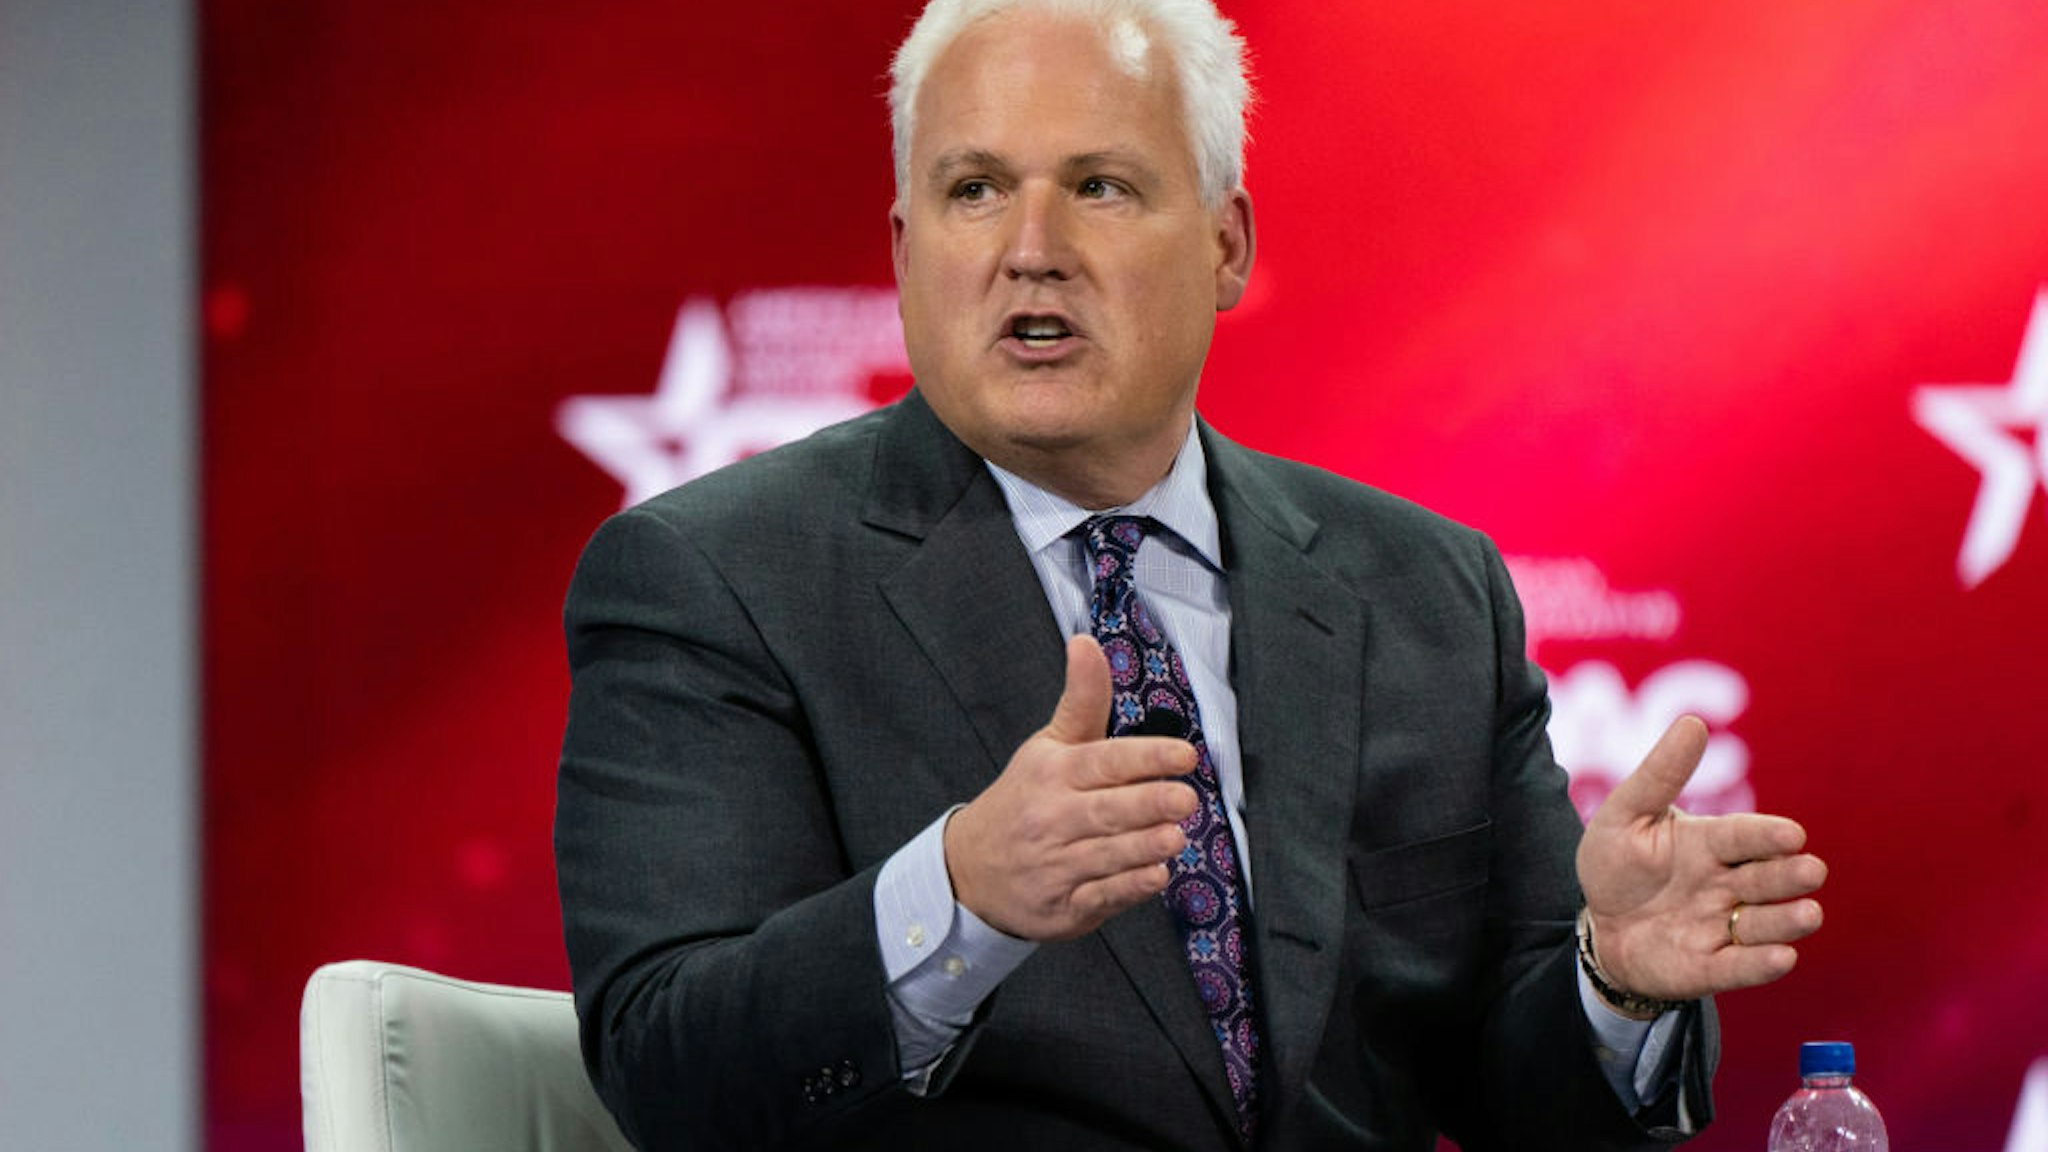 Matt Schlapp, chairman of the American Conservative Union, speaks during a panel discussion at the Conservative Political Action Conference (CPAC) in Orlando, Florida, U.S., on Saturday, Feb. 27, 2021. Donald Trump will speak at the annual Conservative Political Action Campaign conference in Florida, his first public appearance since leaving the White House, to an audience of mostly loyal followers. Photographer: Elijah Nouvelage/Bloomberg via Getty Images